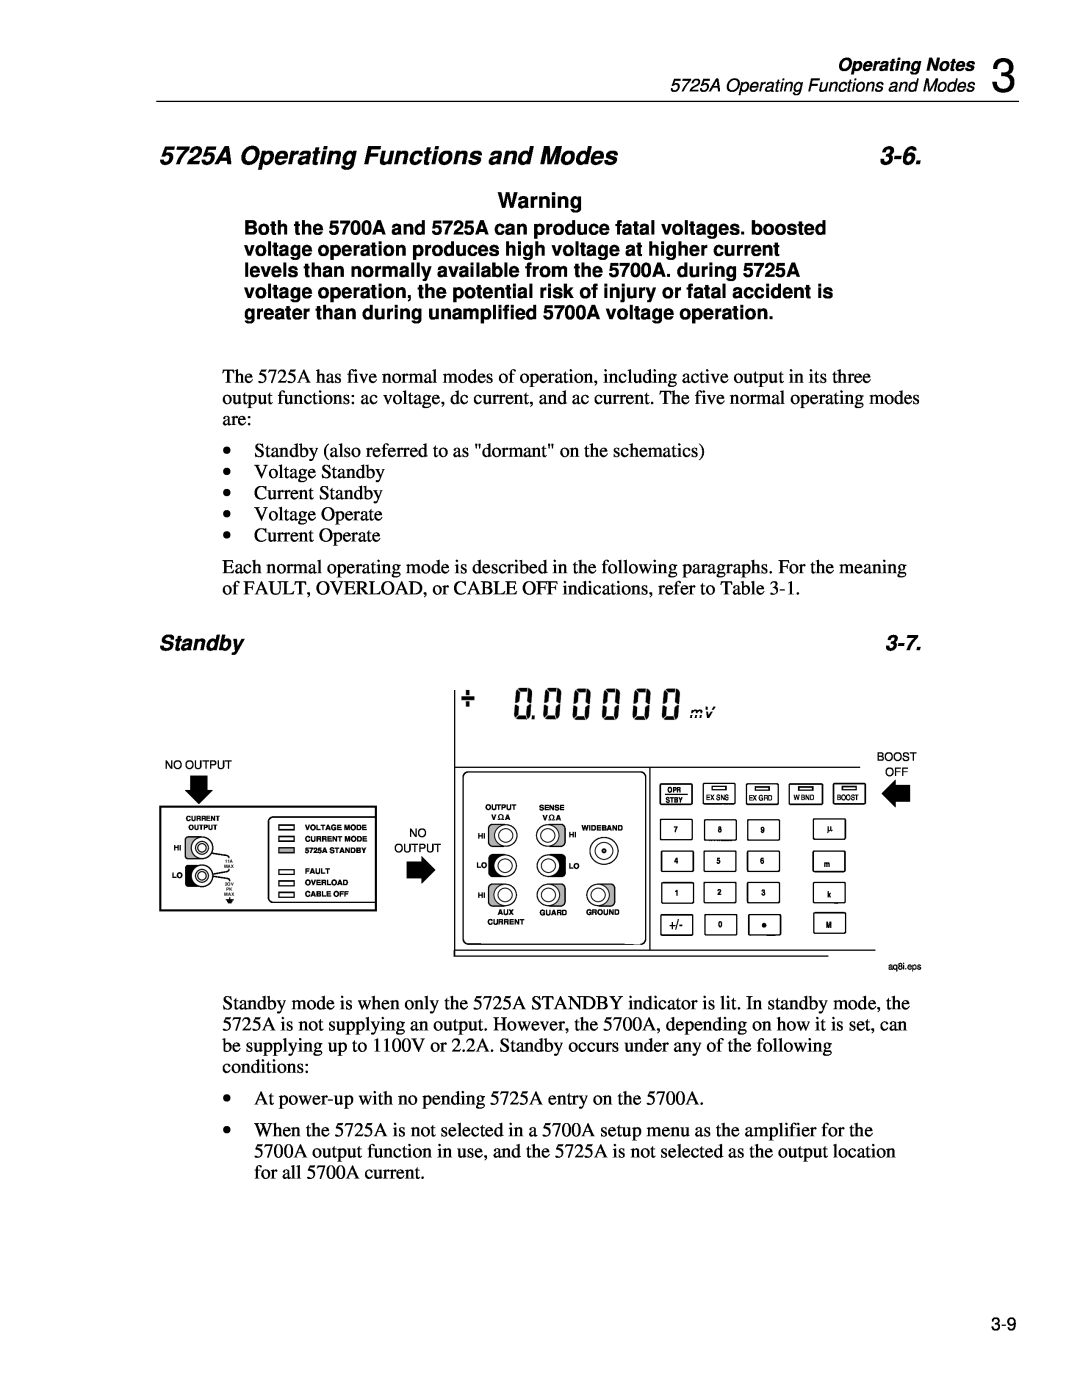 Fluke instruction manual 5725A Operating Functions and Modes, Standby 